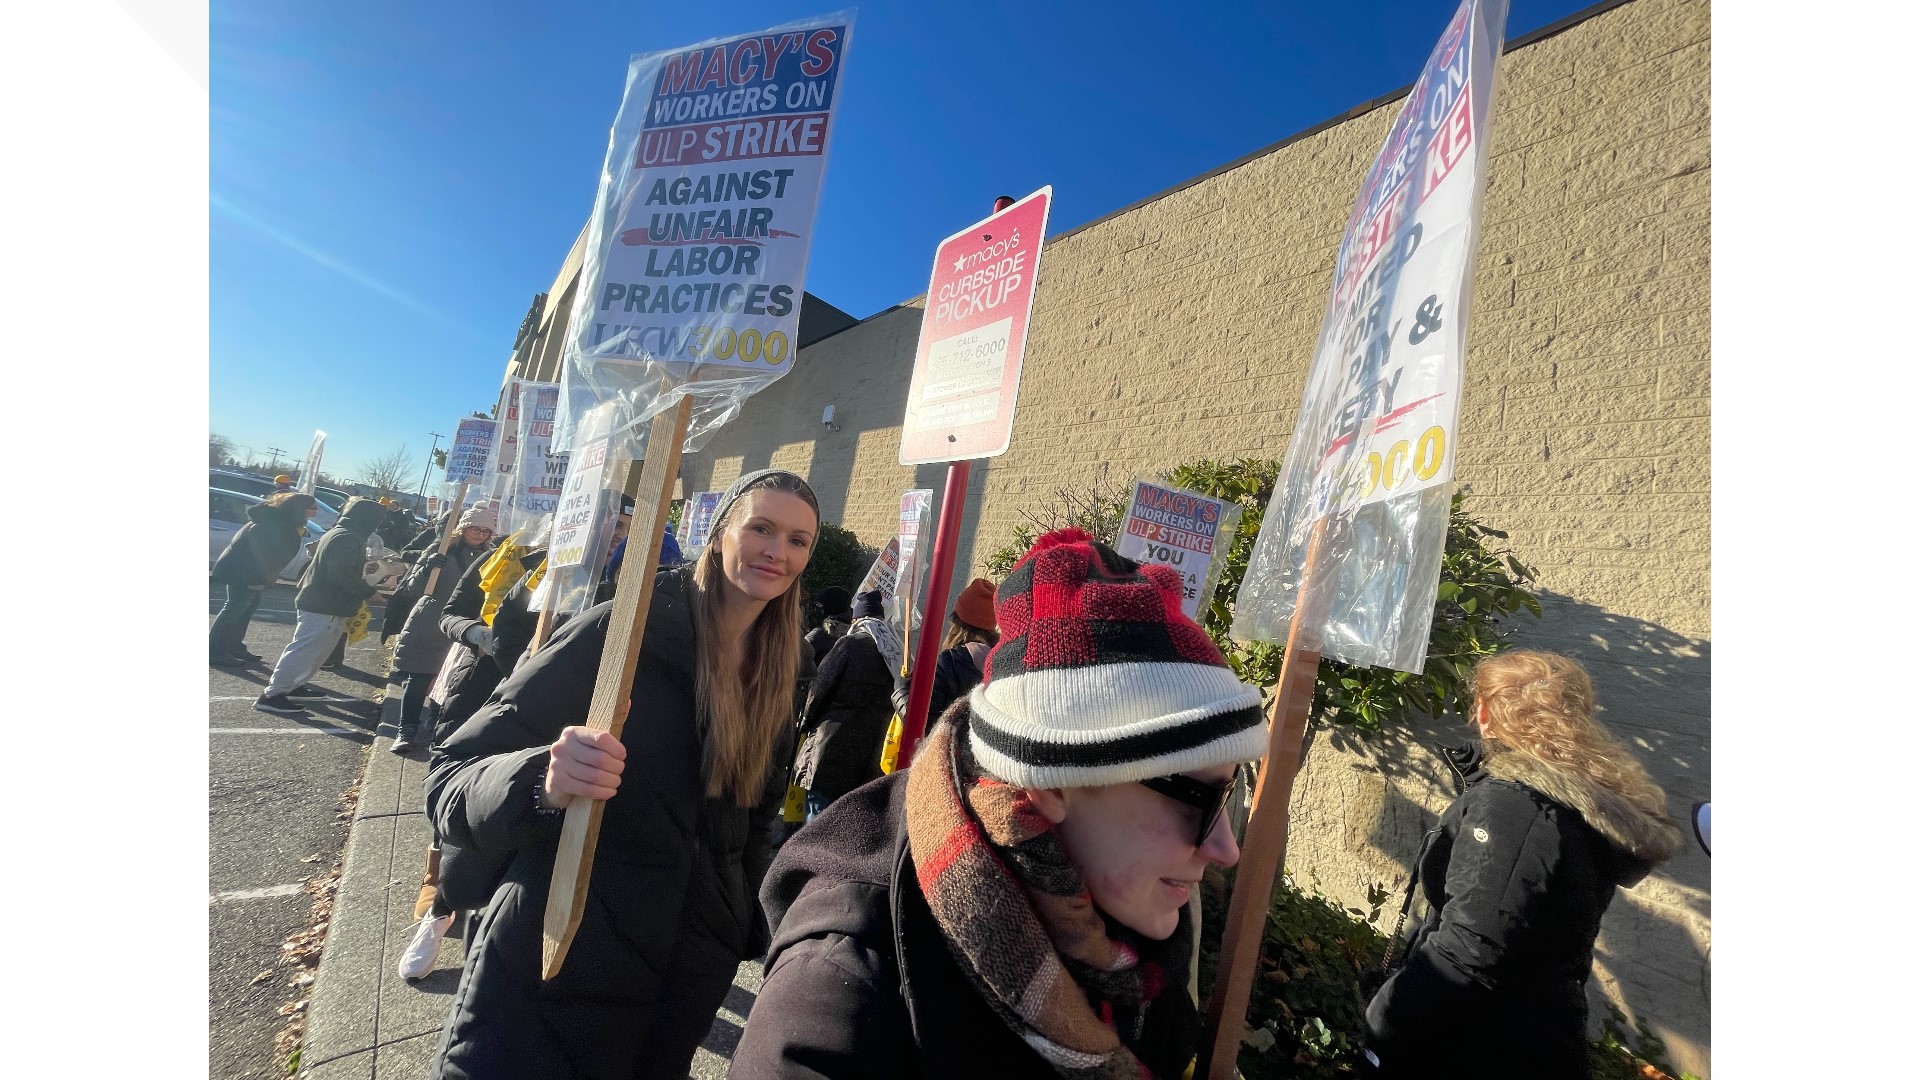 Hundreds of Macy’s department store workers went on strike Friday at three western Washington locations over what the union called unfair labor practices.